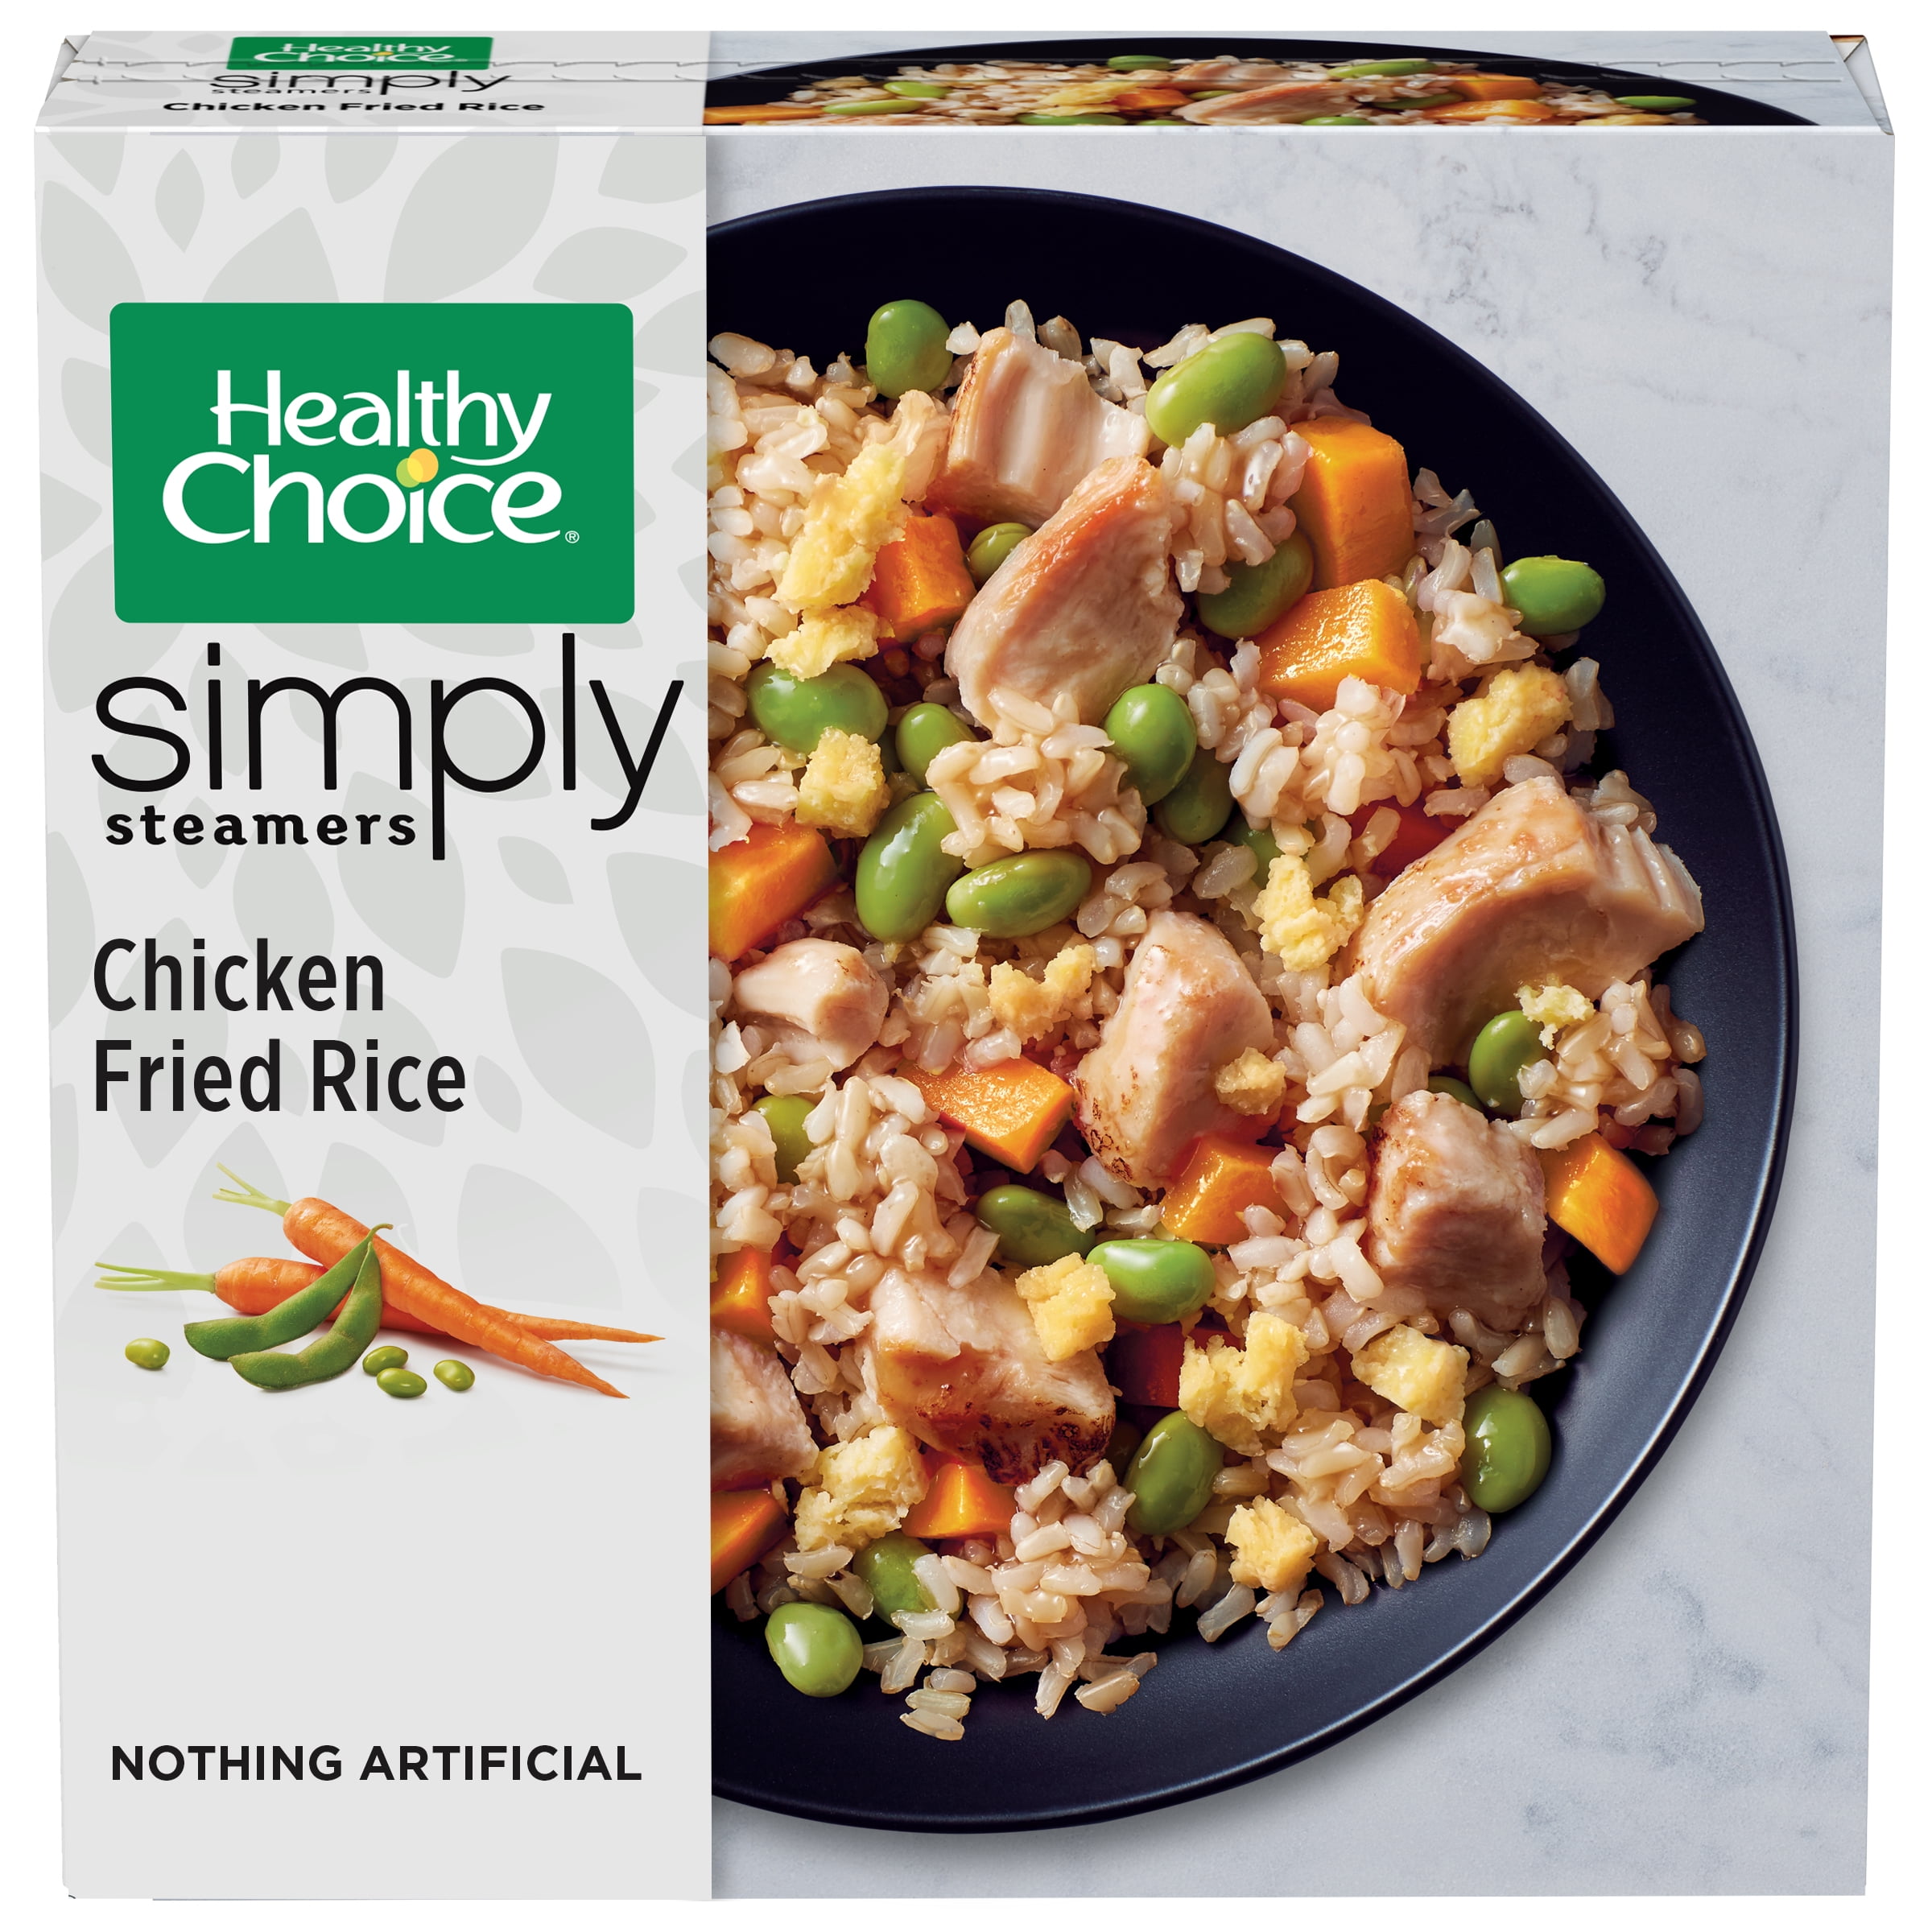 Healthy Choice Simply Steamers Chicken Fried Rice Frozen Meal, 10 oz (Frozen)